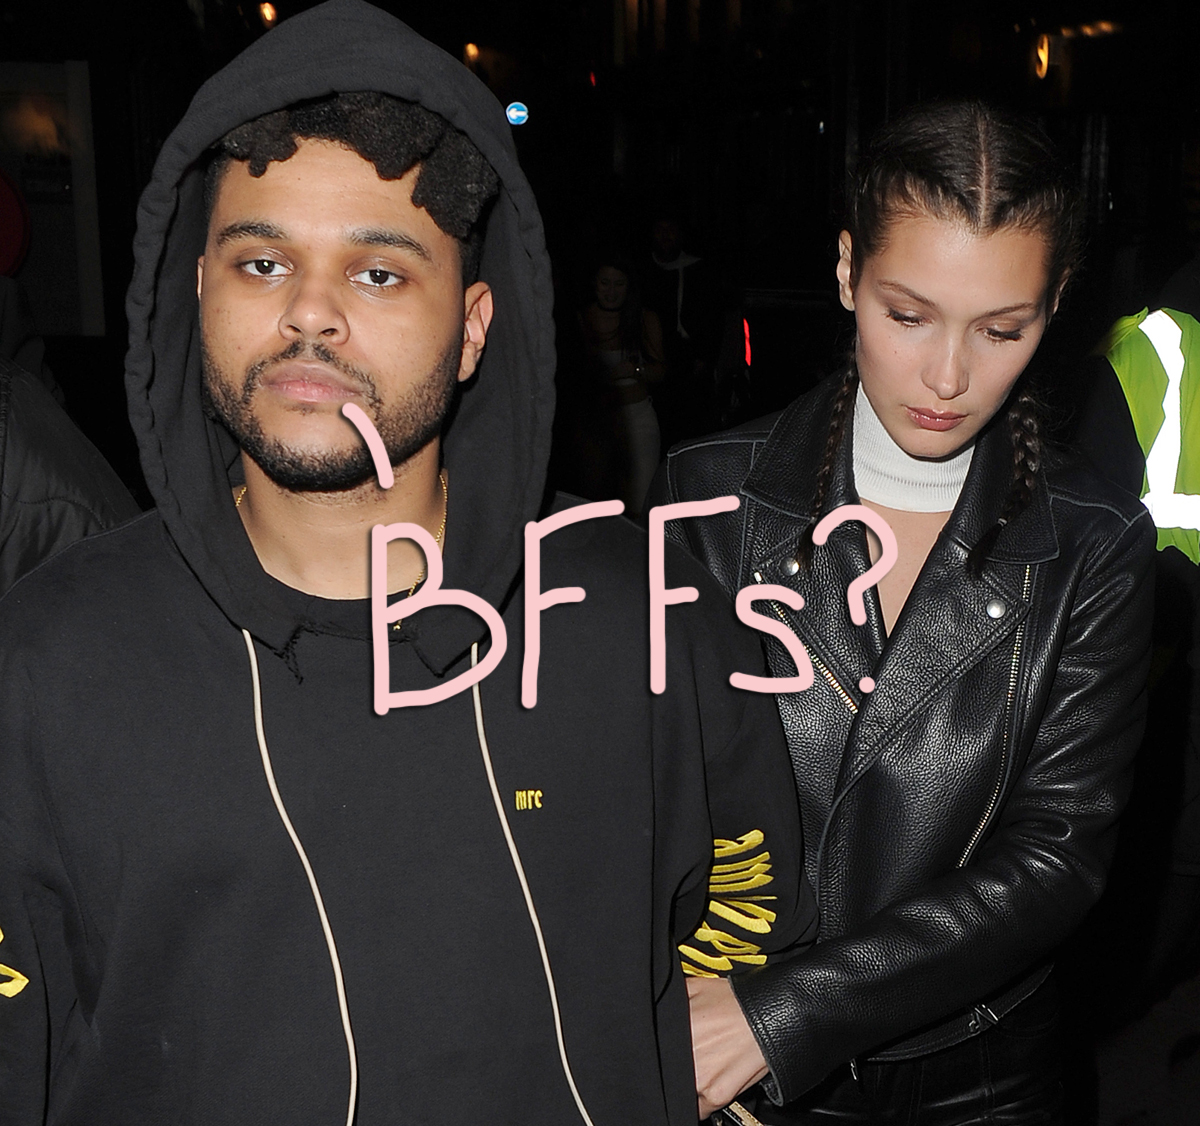 The Weeknd And Bella Hadid Are Simply Good Friends According To